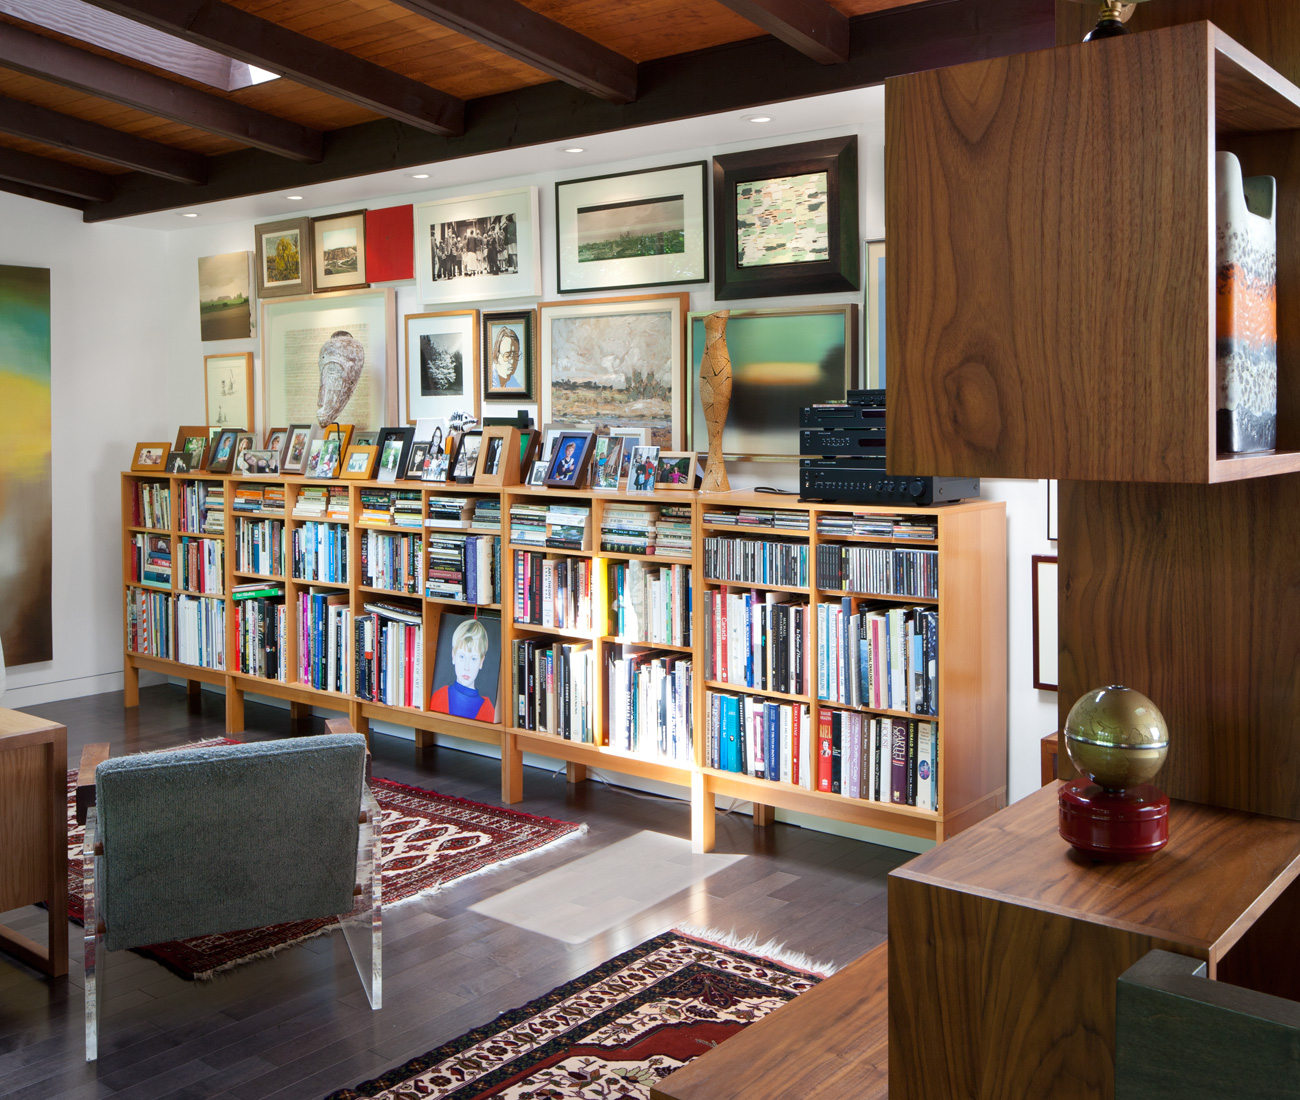 Vinyl record holder in the living room of a mid century home